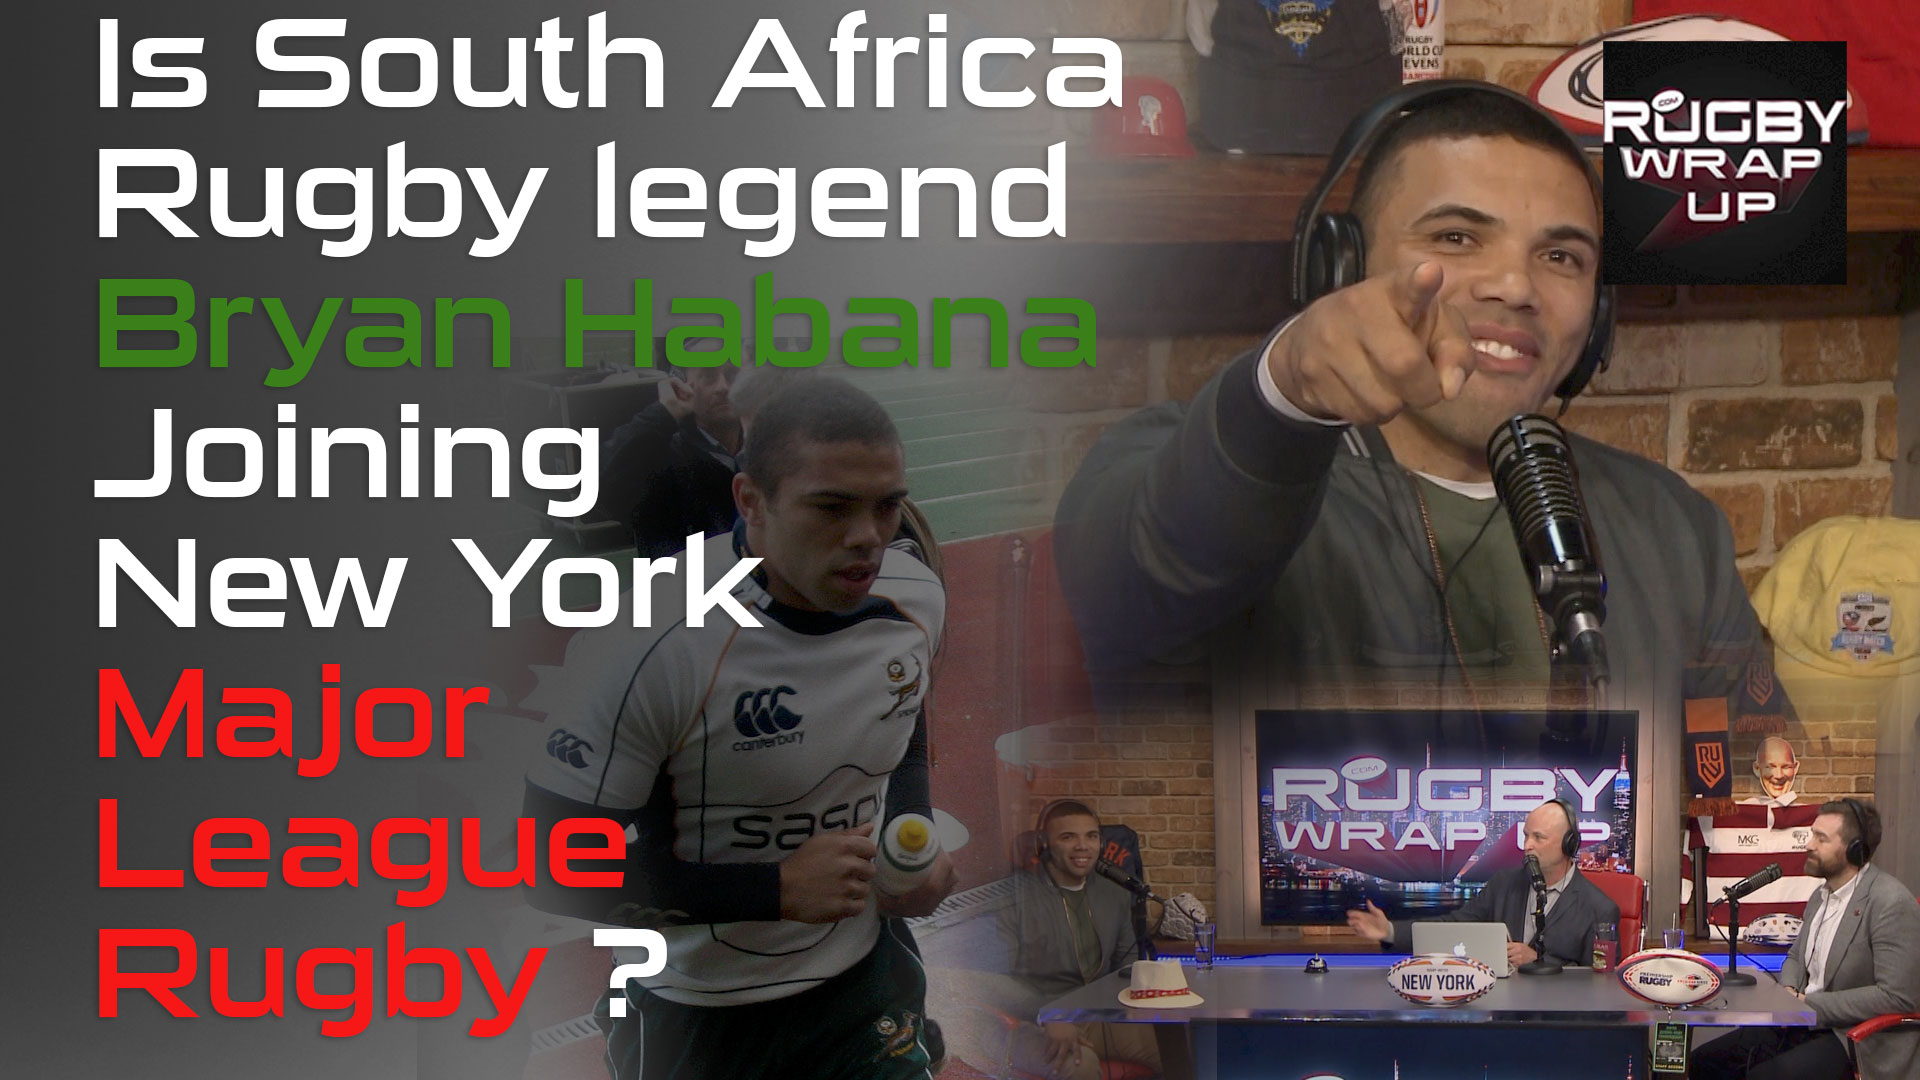 Bryan Habana on MLR Rumors, Perry Baker, Play Rugby USA Changing Lives, Top Career Moments, Rugby_Wrap_Up